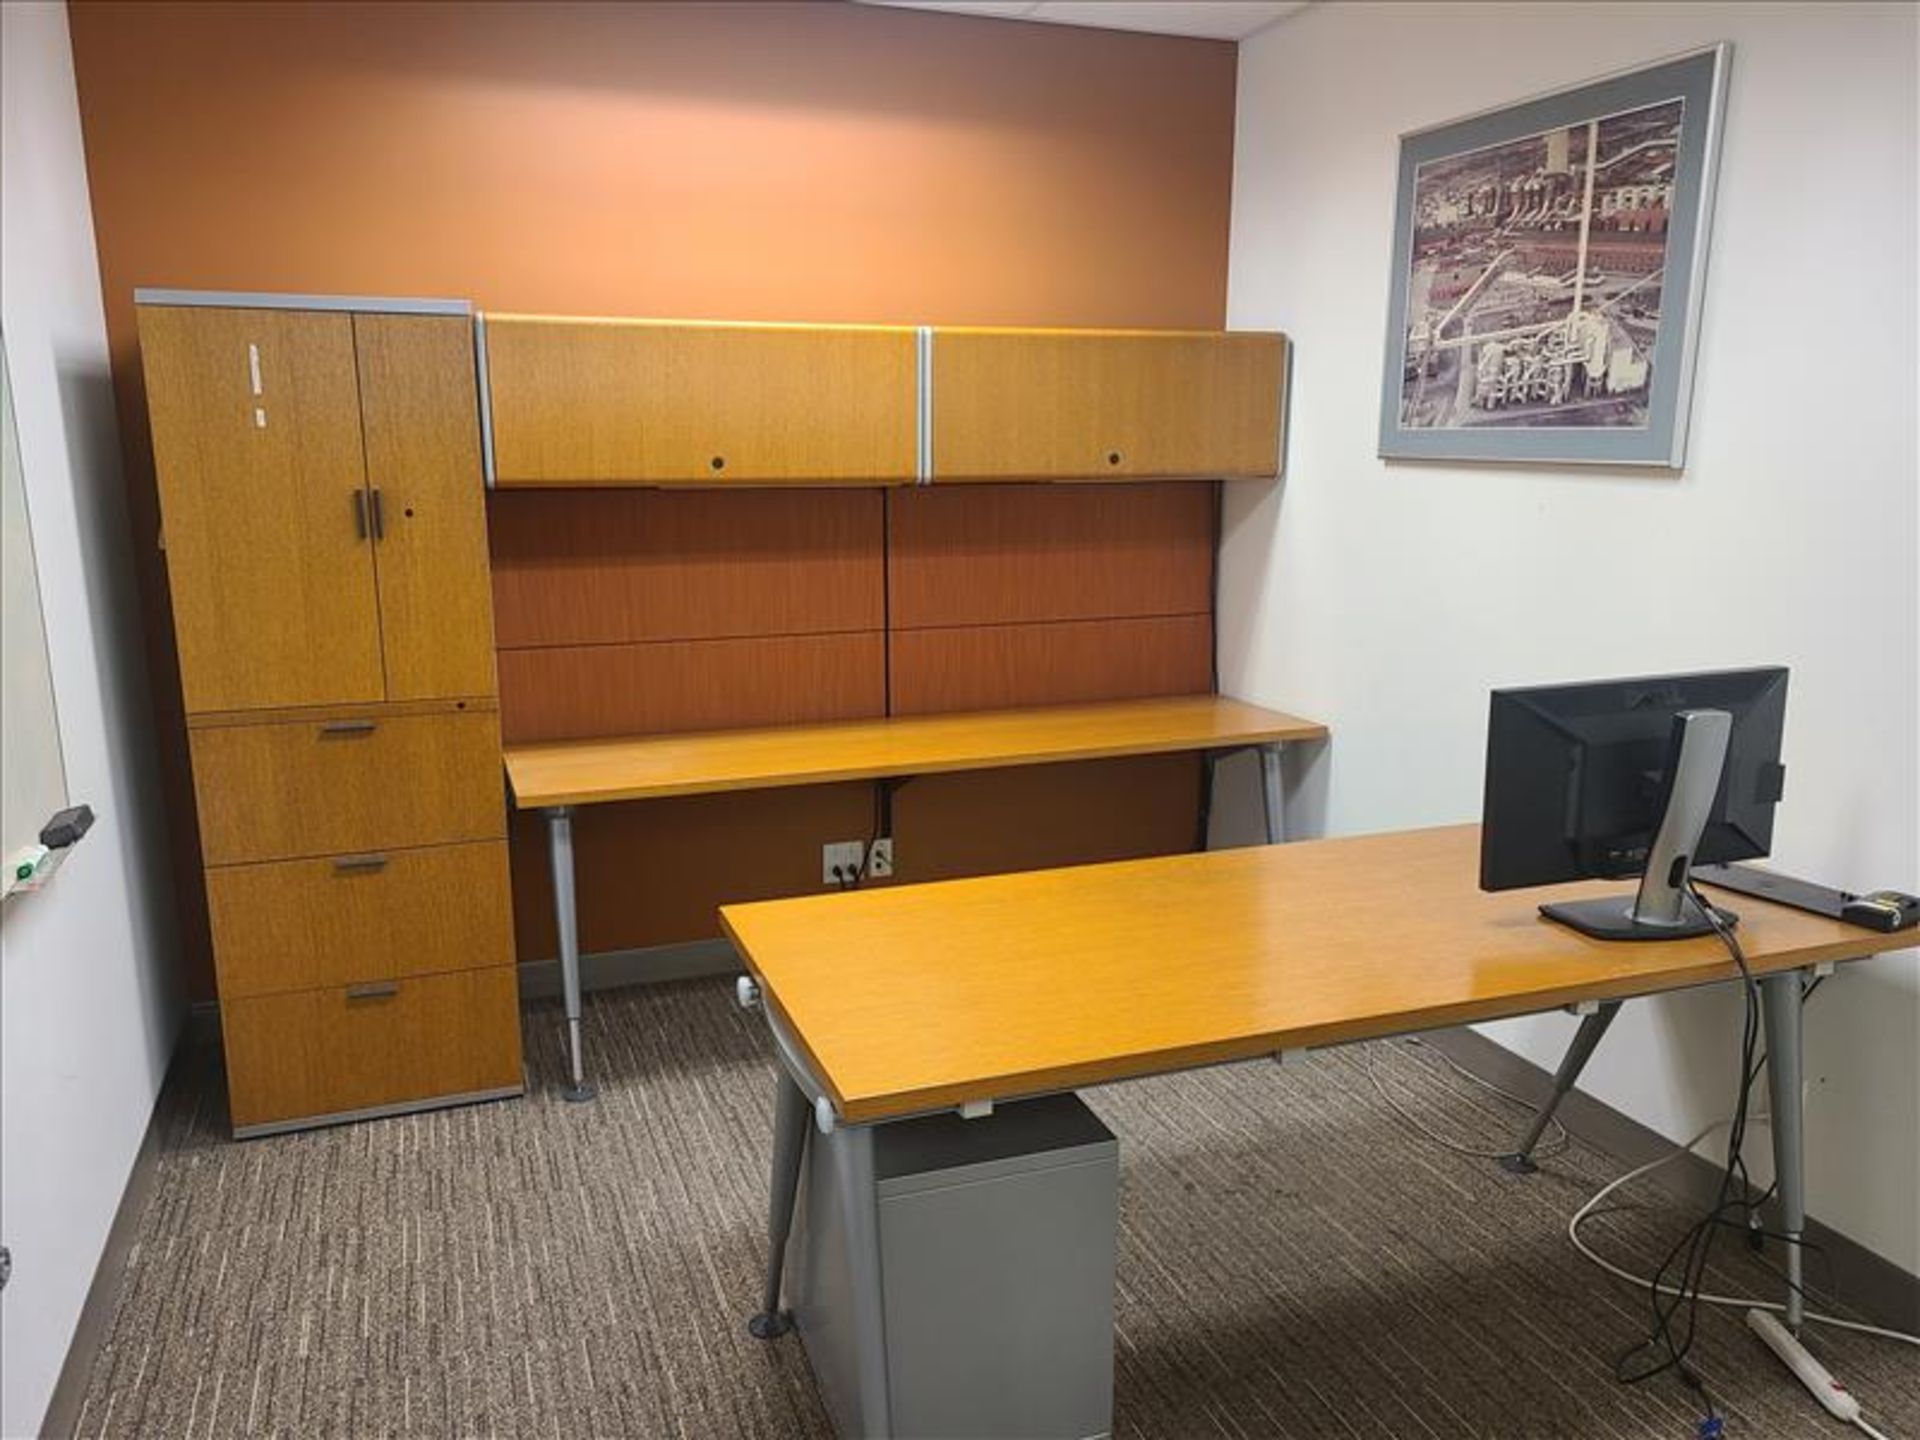 Private Office Suite incl; front desk approx. 72 in. x 30 in., back desk approx. 84 in. x 23 in., (